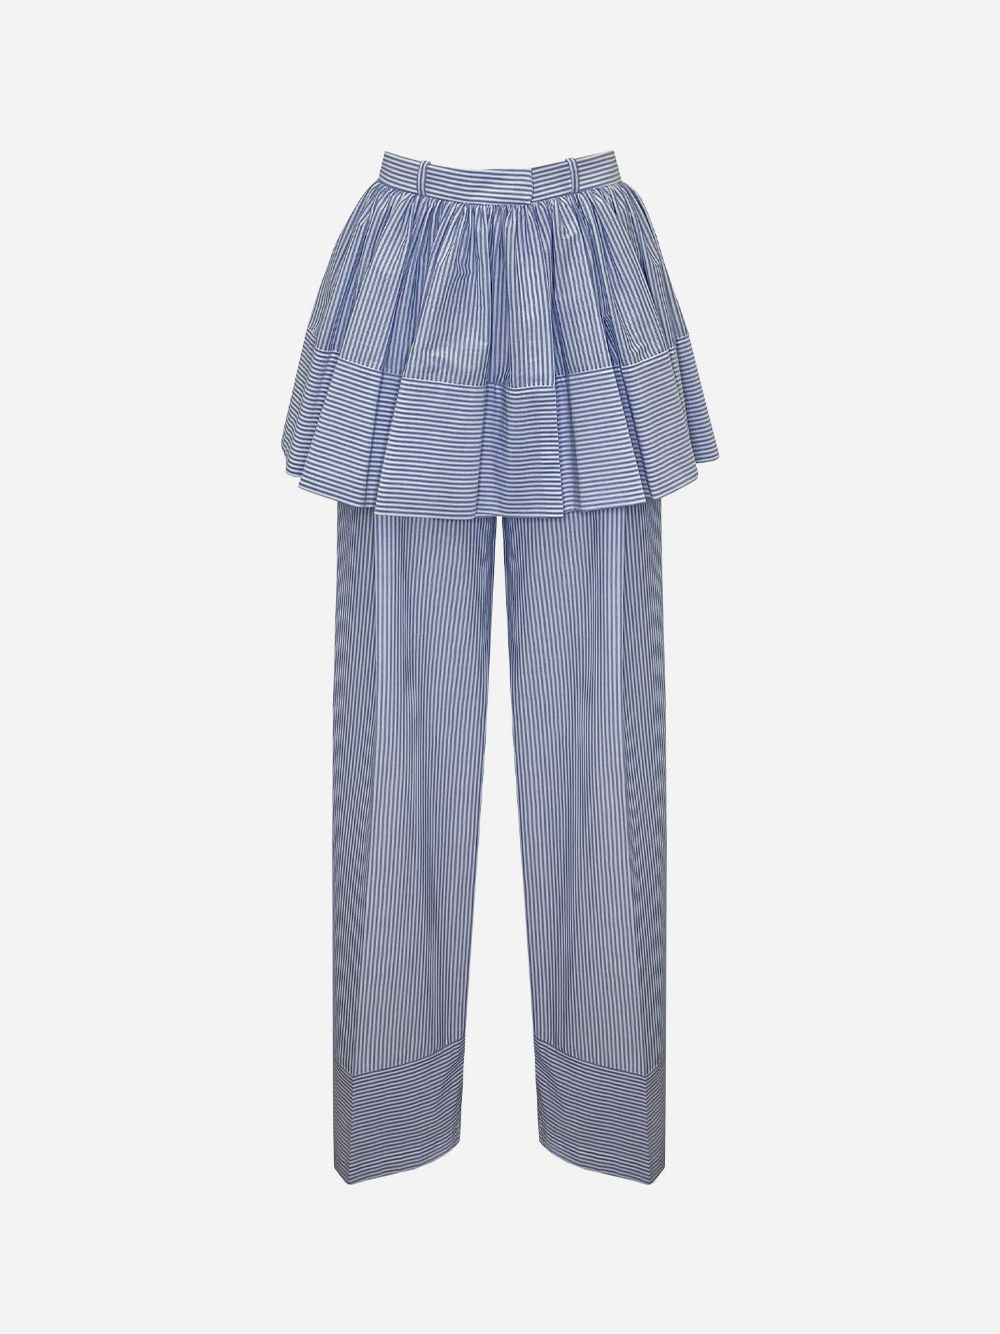 Ruffle Frill Baby Blue Trousers 